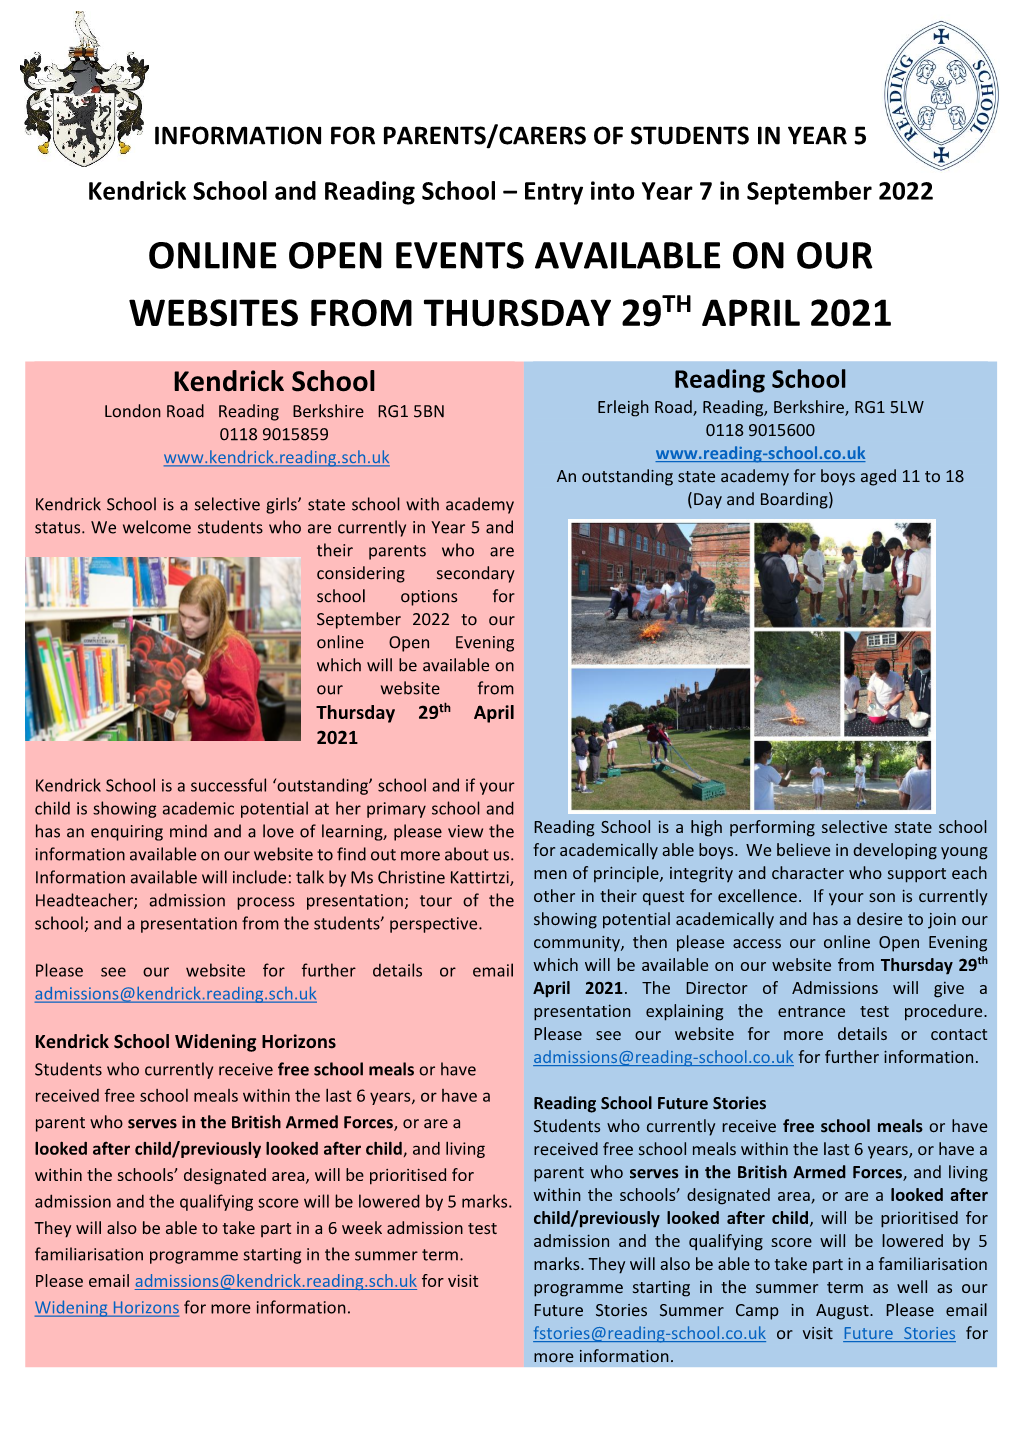 Reading School – Entry Into Year 7 in September 2022 ONLINE OPEN EVENTS AVAILABLE on OUR WEBSITES from THURSDAY 29TH APRIL 2021